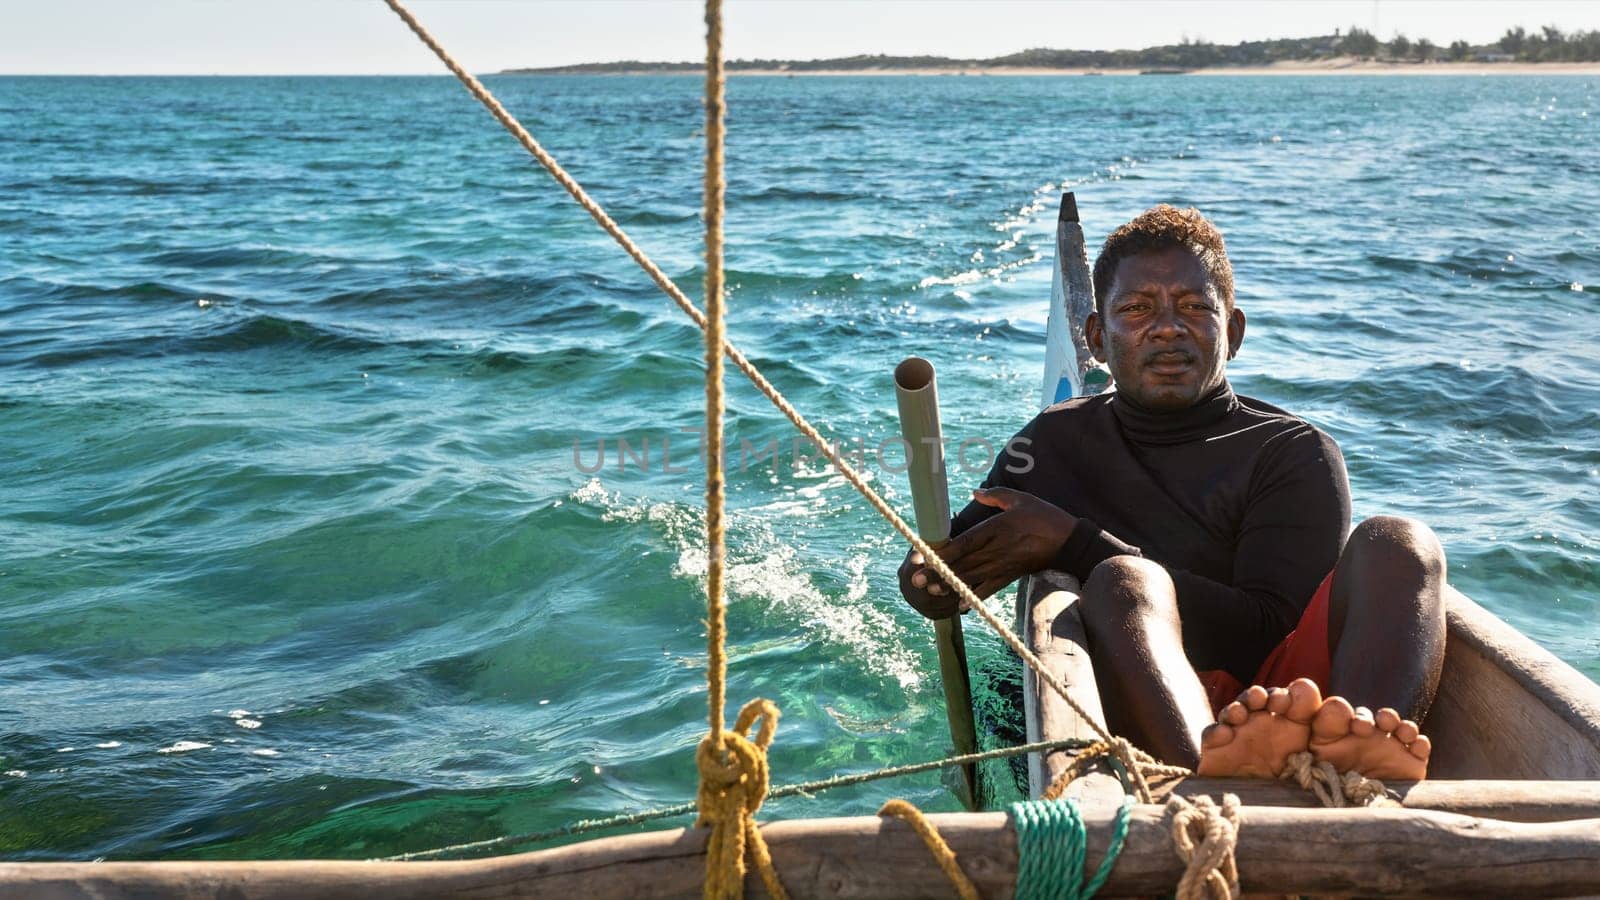 Anakao, Madagascar - May 03, 2019: Unknown Malagasy fisherman sitting on back of his piroga (small fishing boat), leading direction with simple rudder, green blue sea during sunny day in background by Ivanko